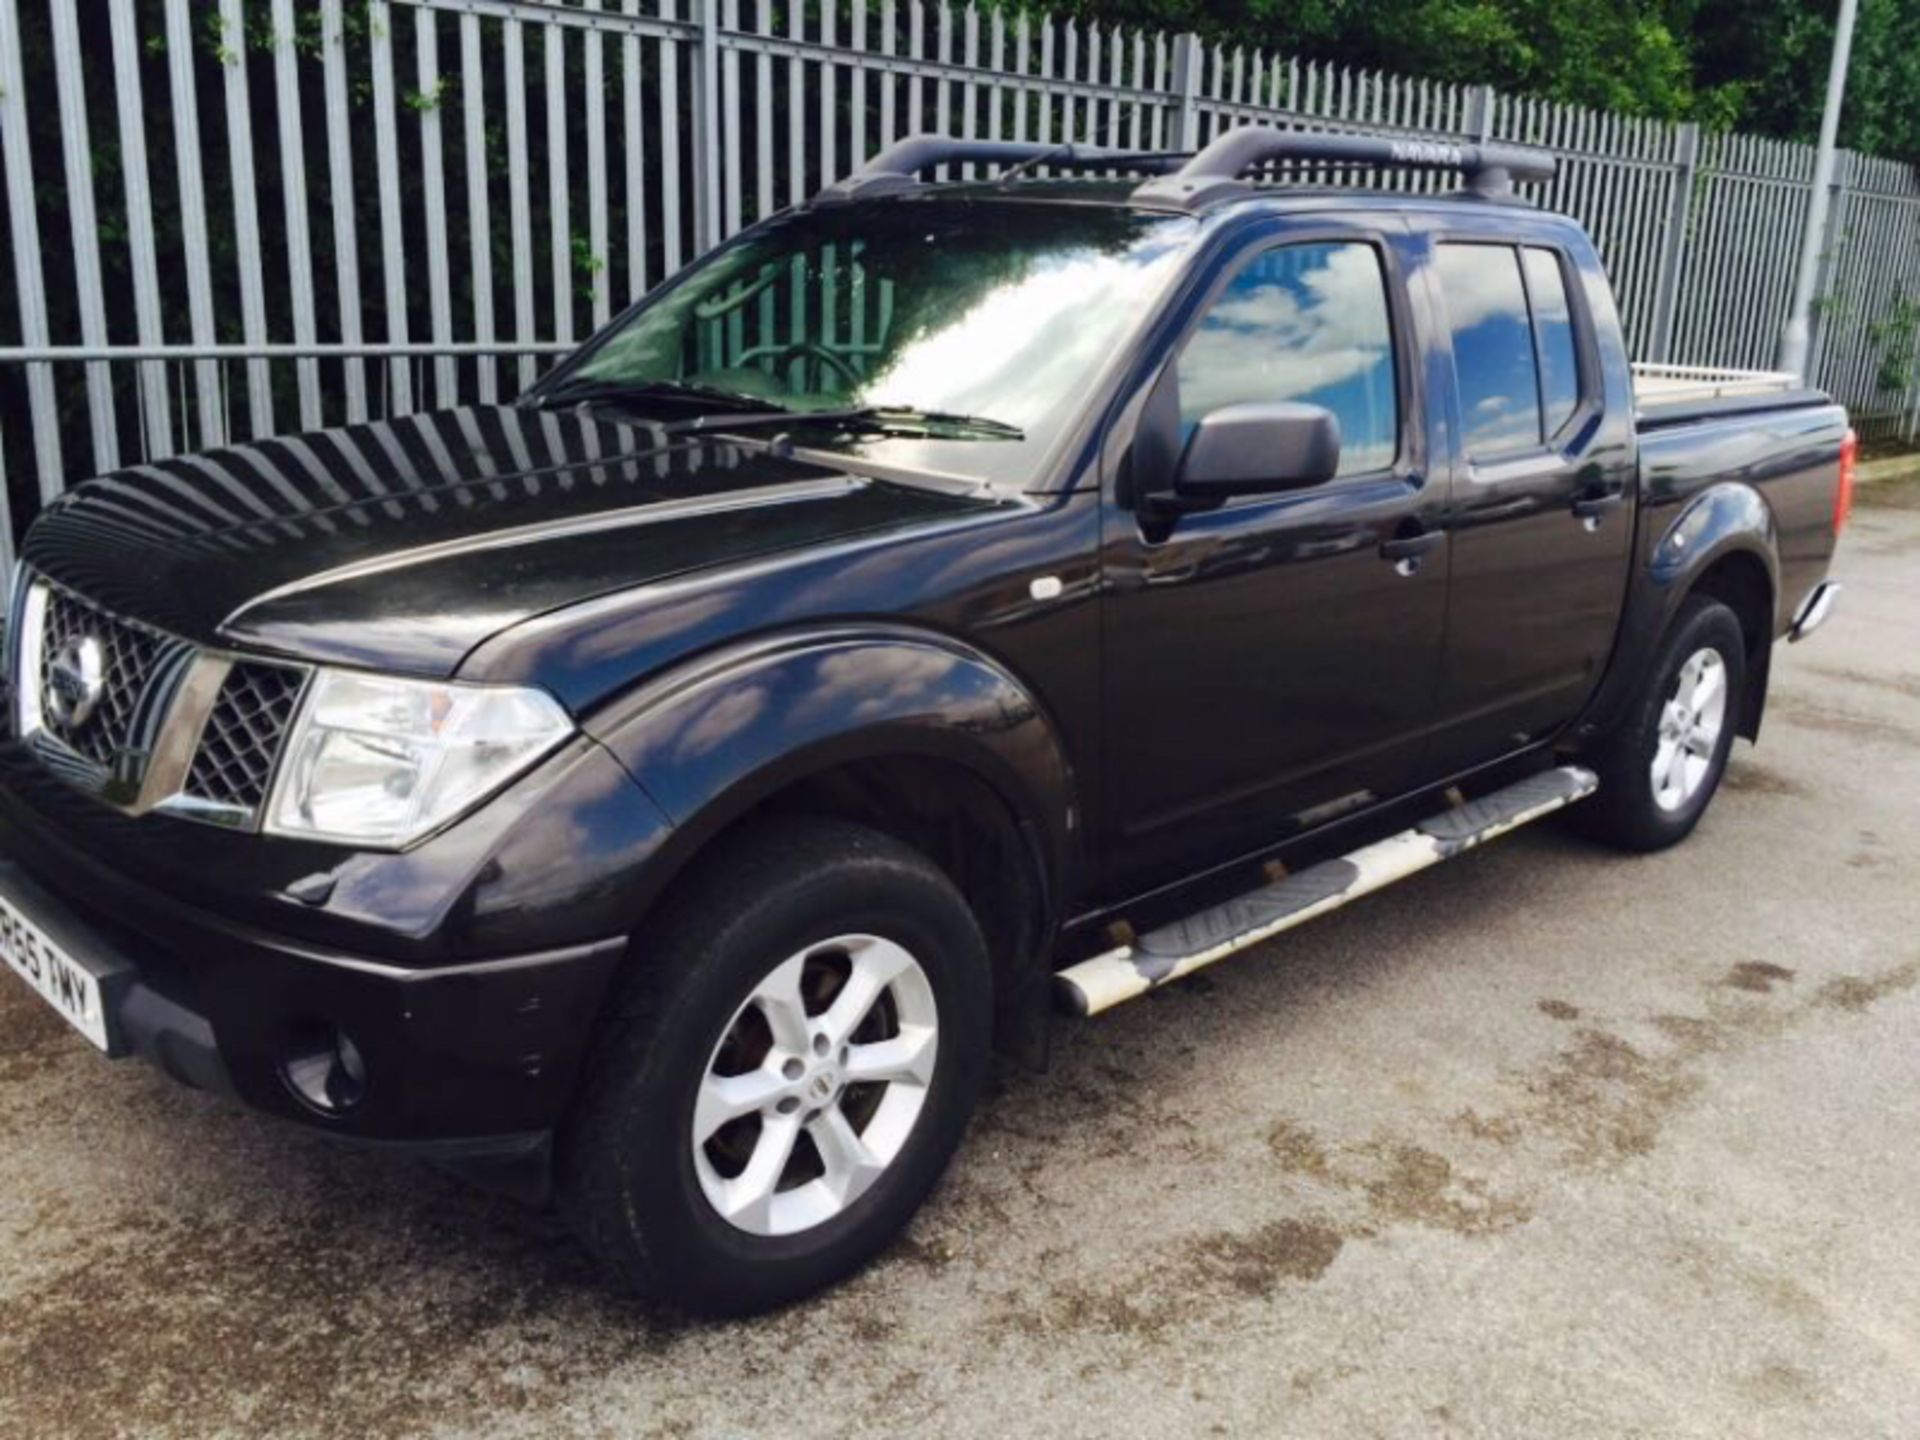 (On Sale) NISSAN NAVARA 2.5DCI - "OUTLAW" DOUBLE CAB - BLACK EDITION - 2006 - GREAT SPEC - NO VAT